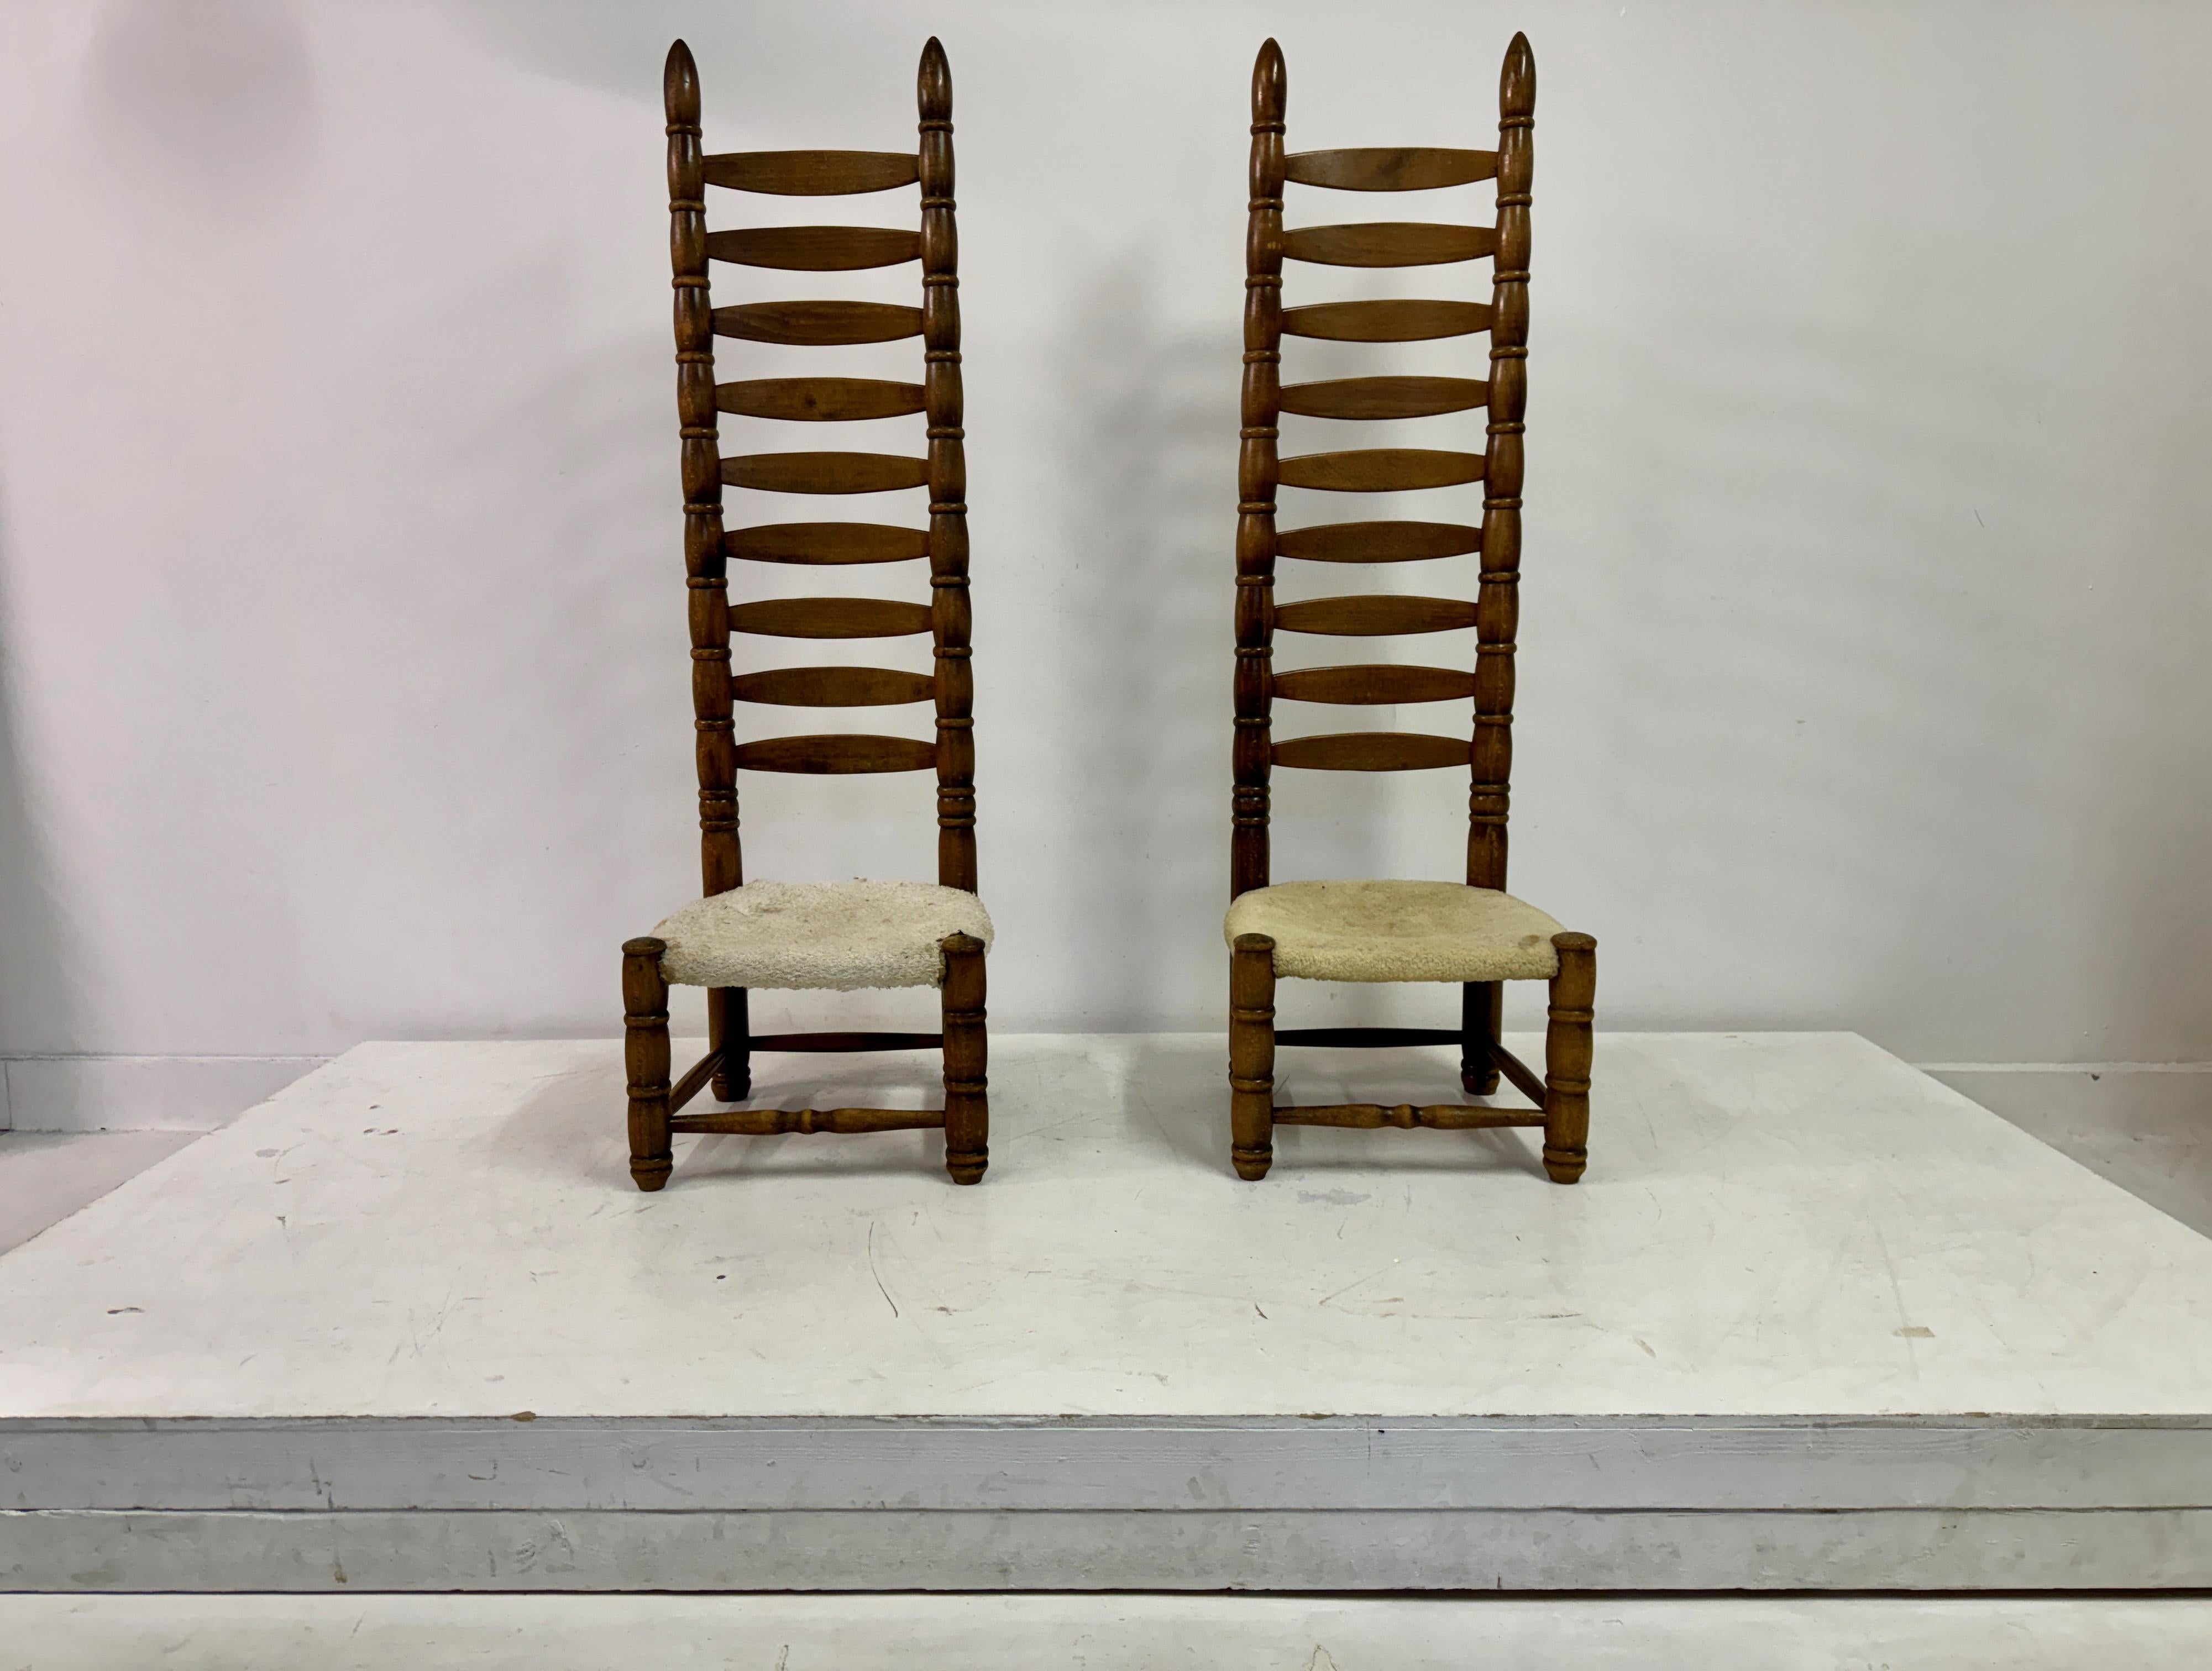 Pair of chairs

With tall ladderbacks

Upholstery is worn and can be changed before sale at cost.

Seat height 32cm

1960s Europe


